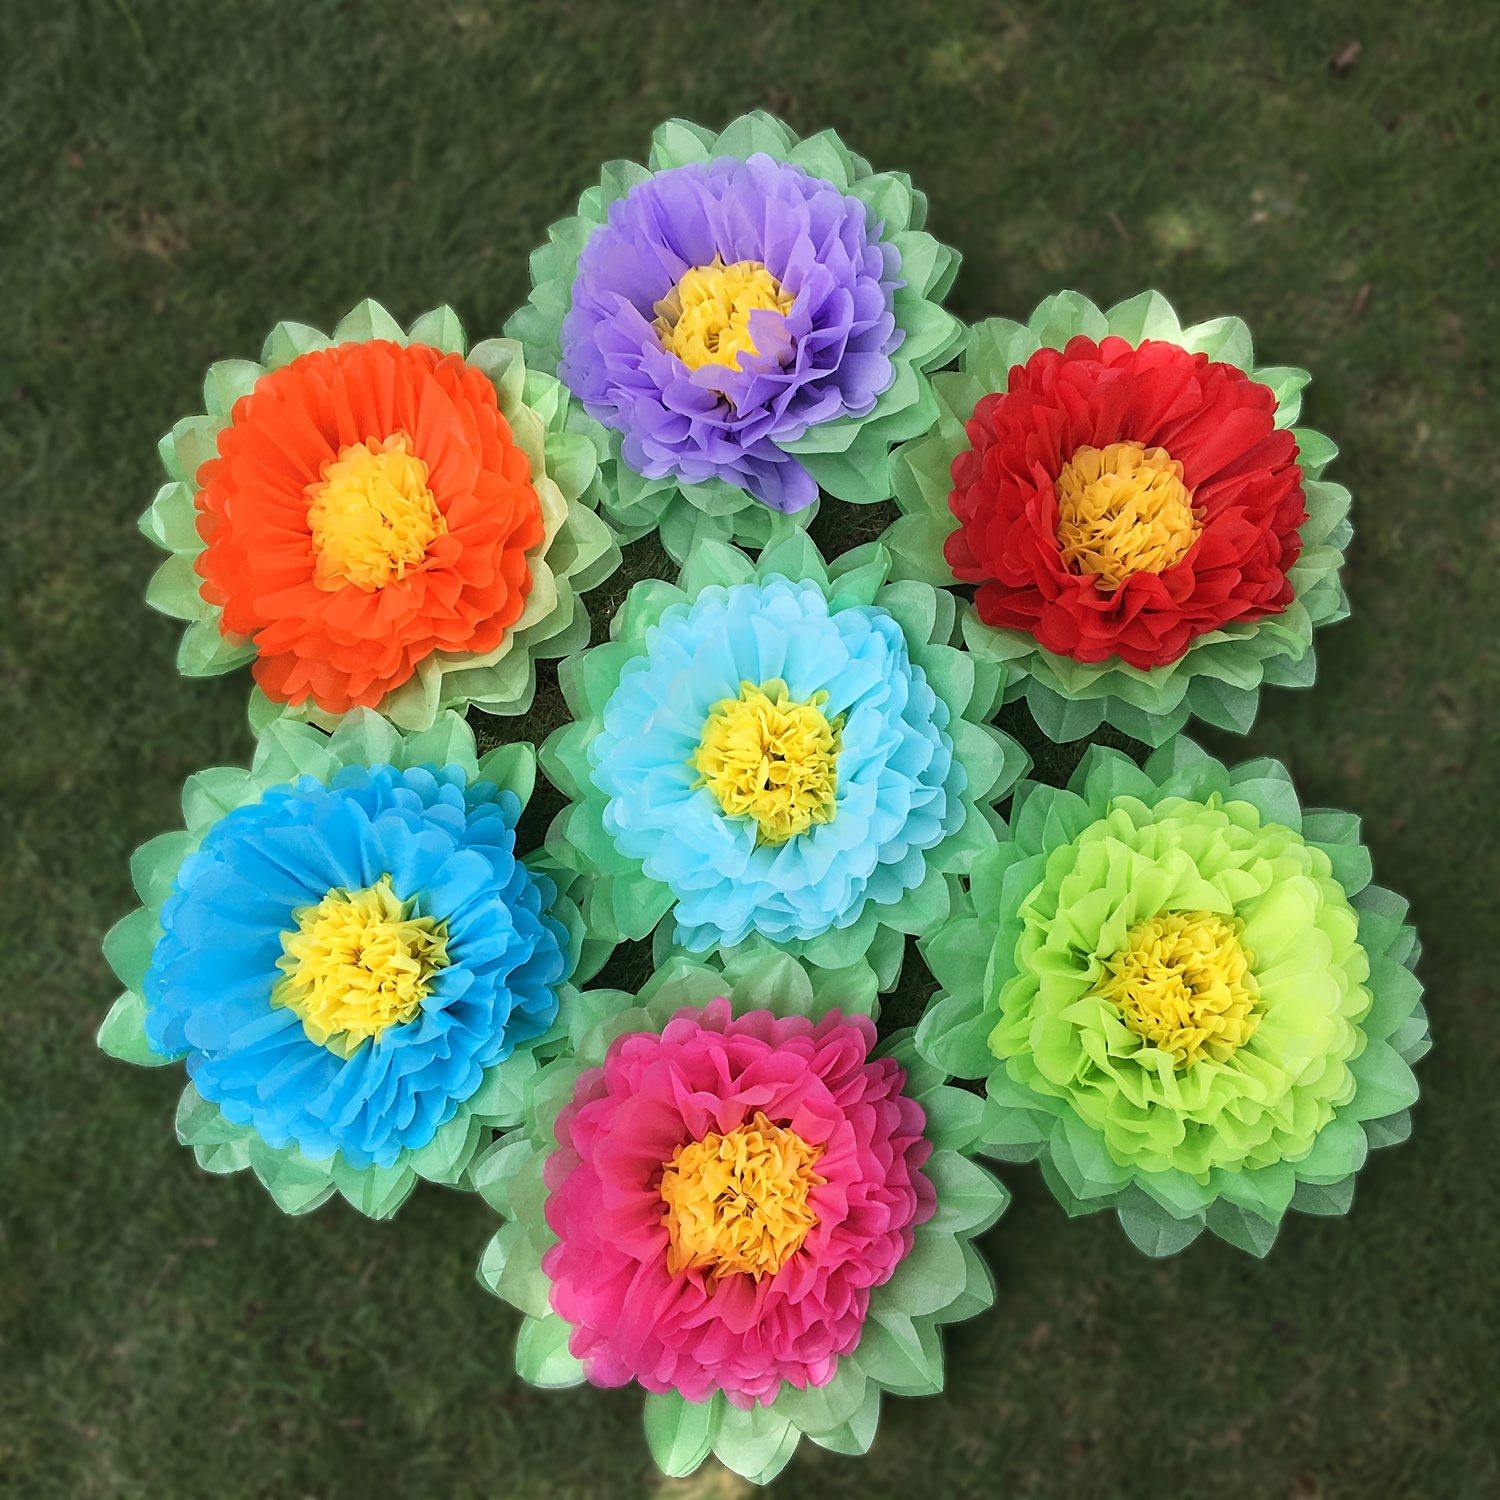 Mexican Tissue Pom Poms Flowers Paper Wedding Flower Photo Wall Fiesta  Decorations Set of 20 